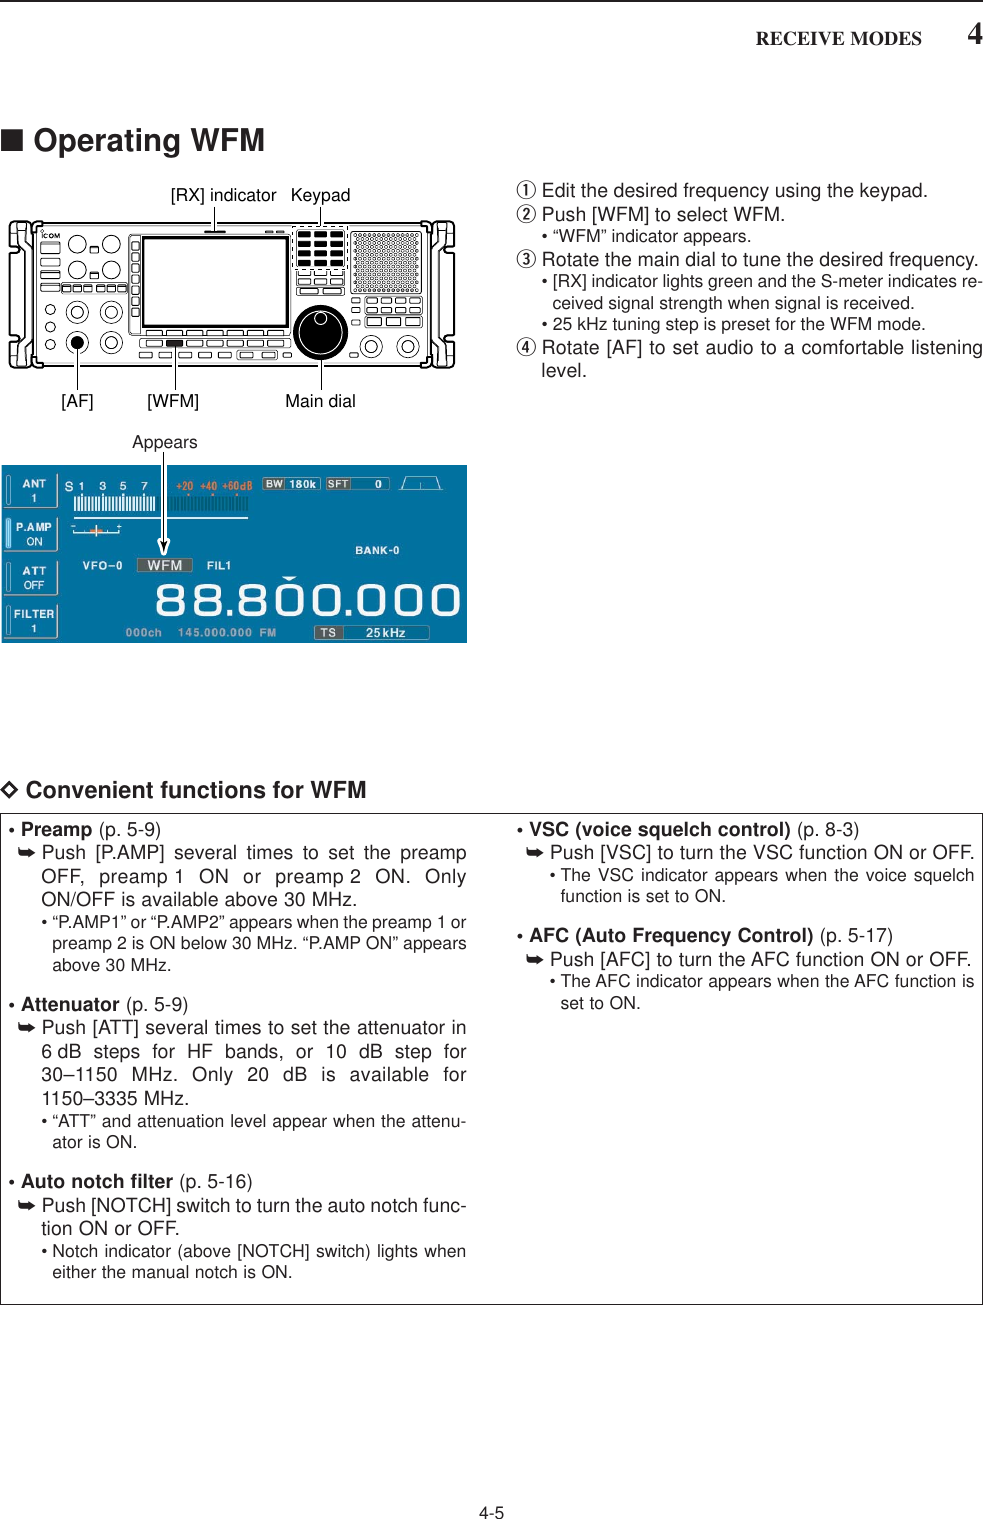 4-54RECEIVE MODES■Operating WFMqEdit the desired frequency using the keypad.wPush [WFM] to select WFM.• “WFM” indicator appears.eRotate the main dial to tune the desired frequency.• [RX] indicator lights green and the S-meter indicates re-ceived signal strength when signal is received.• 25 kHz tuning step is preset for the WFM mode.rRotate [AF] to set audio to a comfortable listeninglevel.DConvenient functions for WFMAppearsKeypad[RX] indicator[AF] [WFM] Main dial• Preamp (p. 5-9)➥Push [P.AMP] several times to set the preampOFF, preamp 1 ON or preamp 2 ON. OnlyON/OFF is available above 30 MHz.• “P.AMP1” or “P.AMP2” appears when the preamp 1 orpreamp 2 is ON below 30 MHz. “P.AMP ON” appearsabove 30 MHz.• Attenuator (p. 5-9)➥Push [ATT] several times to set the attenuator in6 dB steps for HF bands, or 10 dB step for30–1150 MHz. Only 20 dB is available for1150–3335 MHz.• “ATT” and attenuation level appear when the attenu-ator is ON.• Auto notch filter (p. 5-16)➥Push [NOTCH] switch to turn the auto notch func-tion ON or OFF.• Notch indicator (above [NOTCH] switch) lights wheneither the manual notch is ON.• VSC (voice squelch control) (p. 8-3)➥Push [VSC] to turn the VSC function ON or OFF.• The VSC indicator appears when the voice squelchfunction is set to ON.• AFC (Auto Frequency Control) (p. 5-17)➥Push [AFC] to turn the AFC function ON or OFF.• The AFC indicator appears when the AFC function isset to ON.